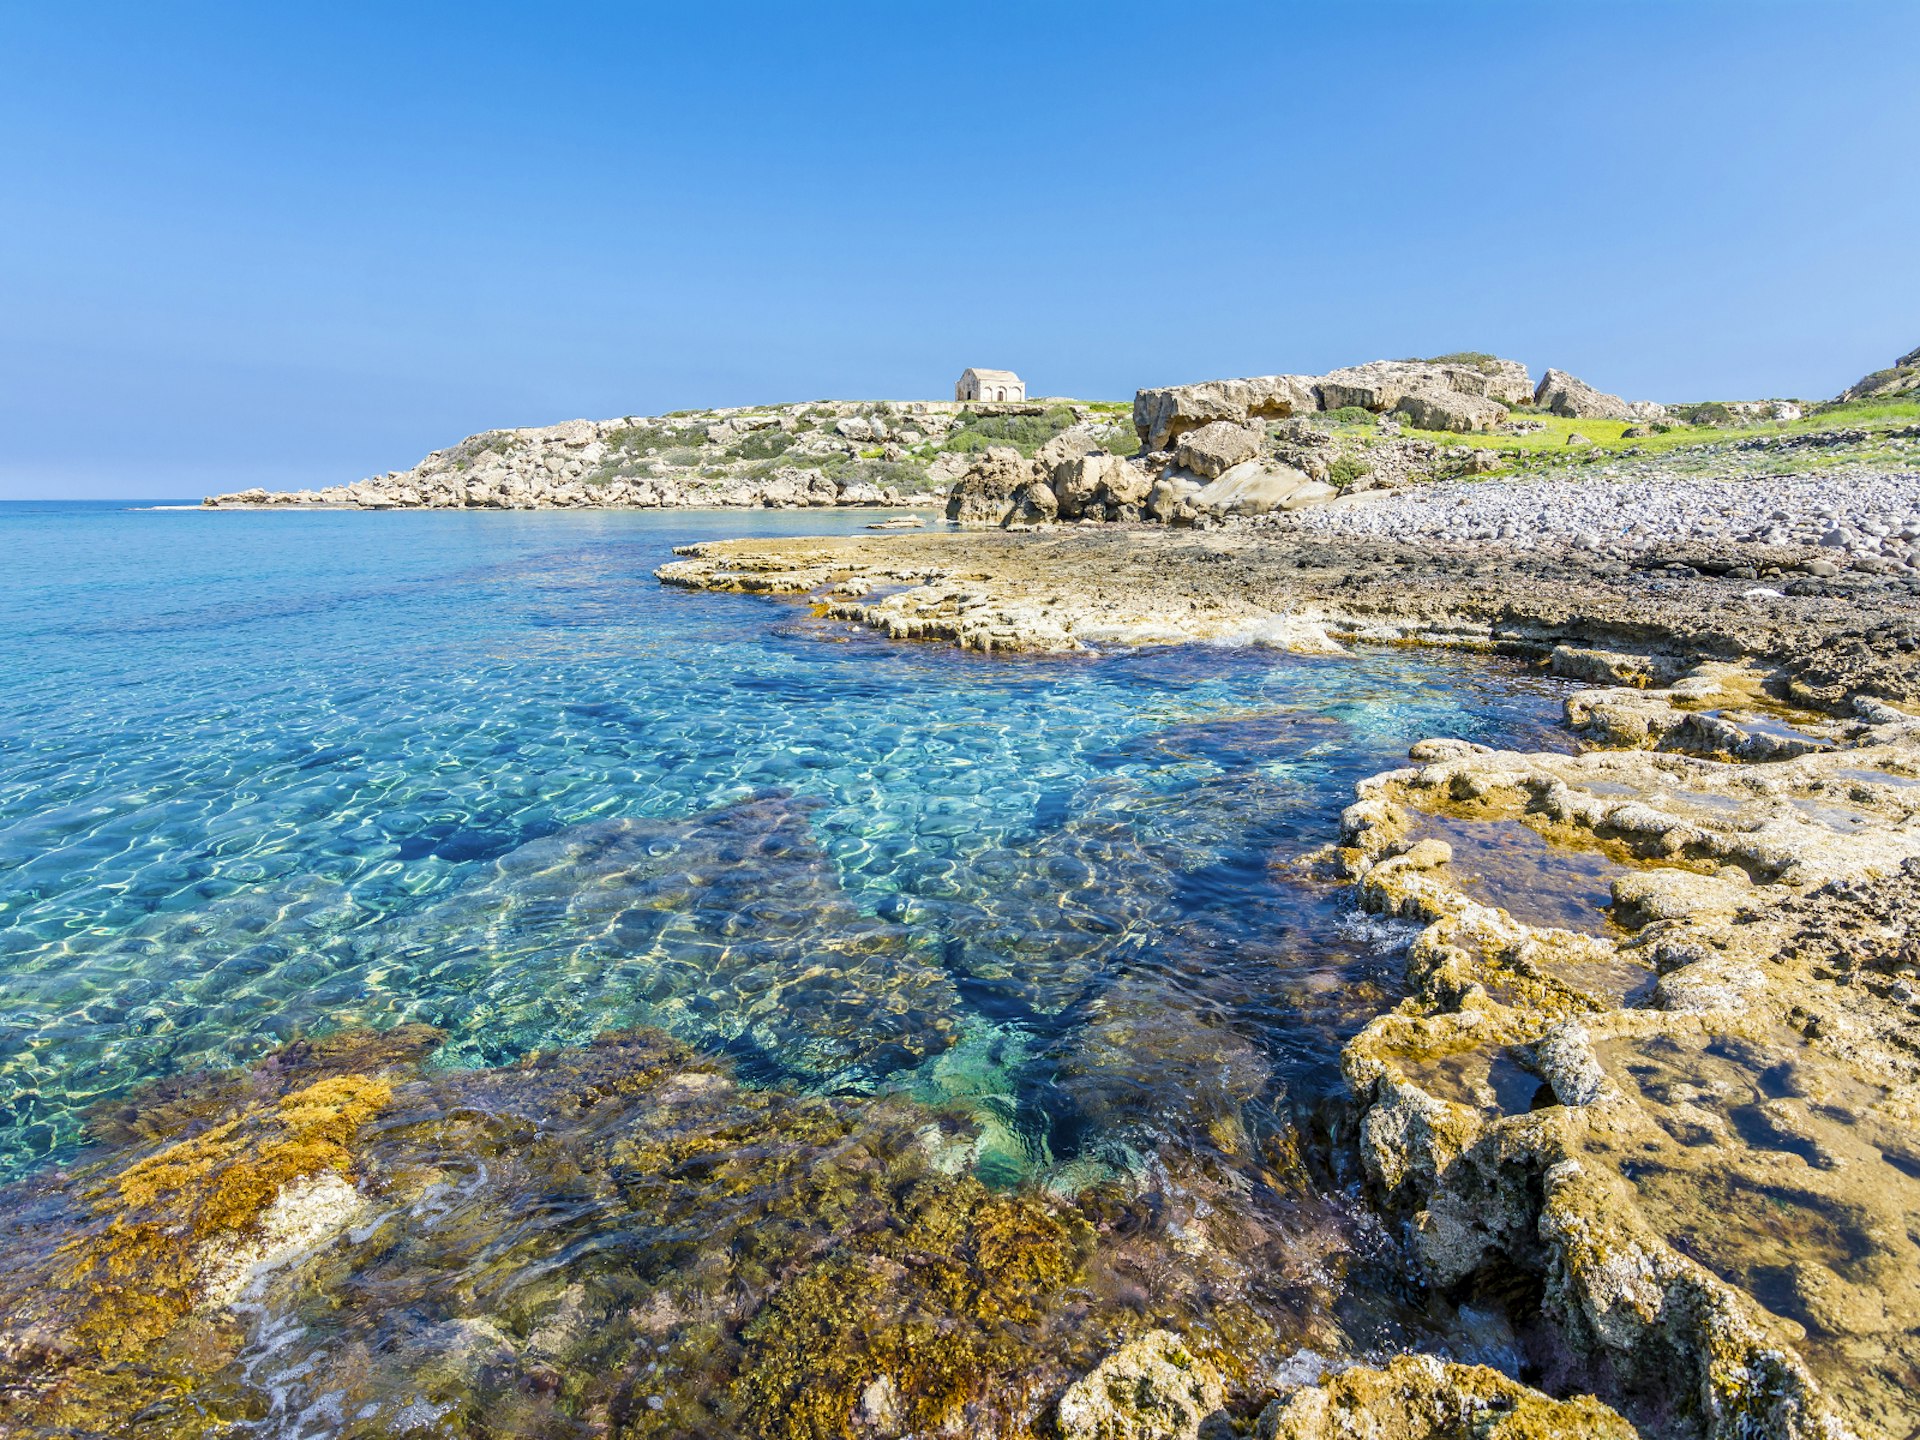 A rocky shoreline with a small stone building in the distance. The sea is clear and very still.